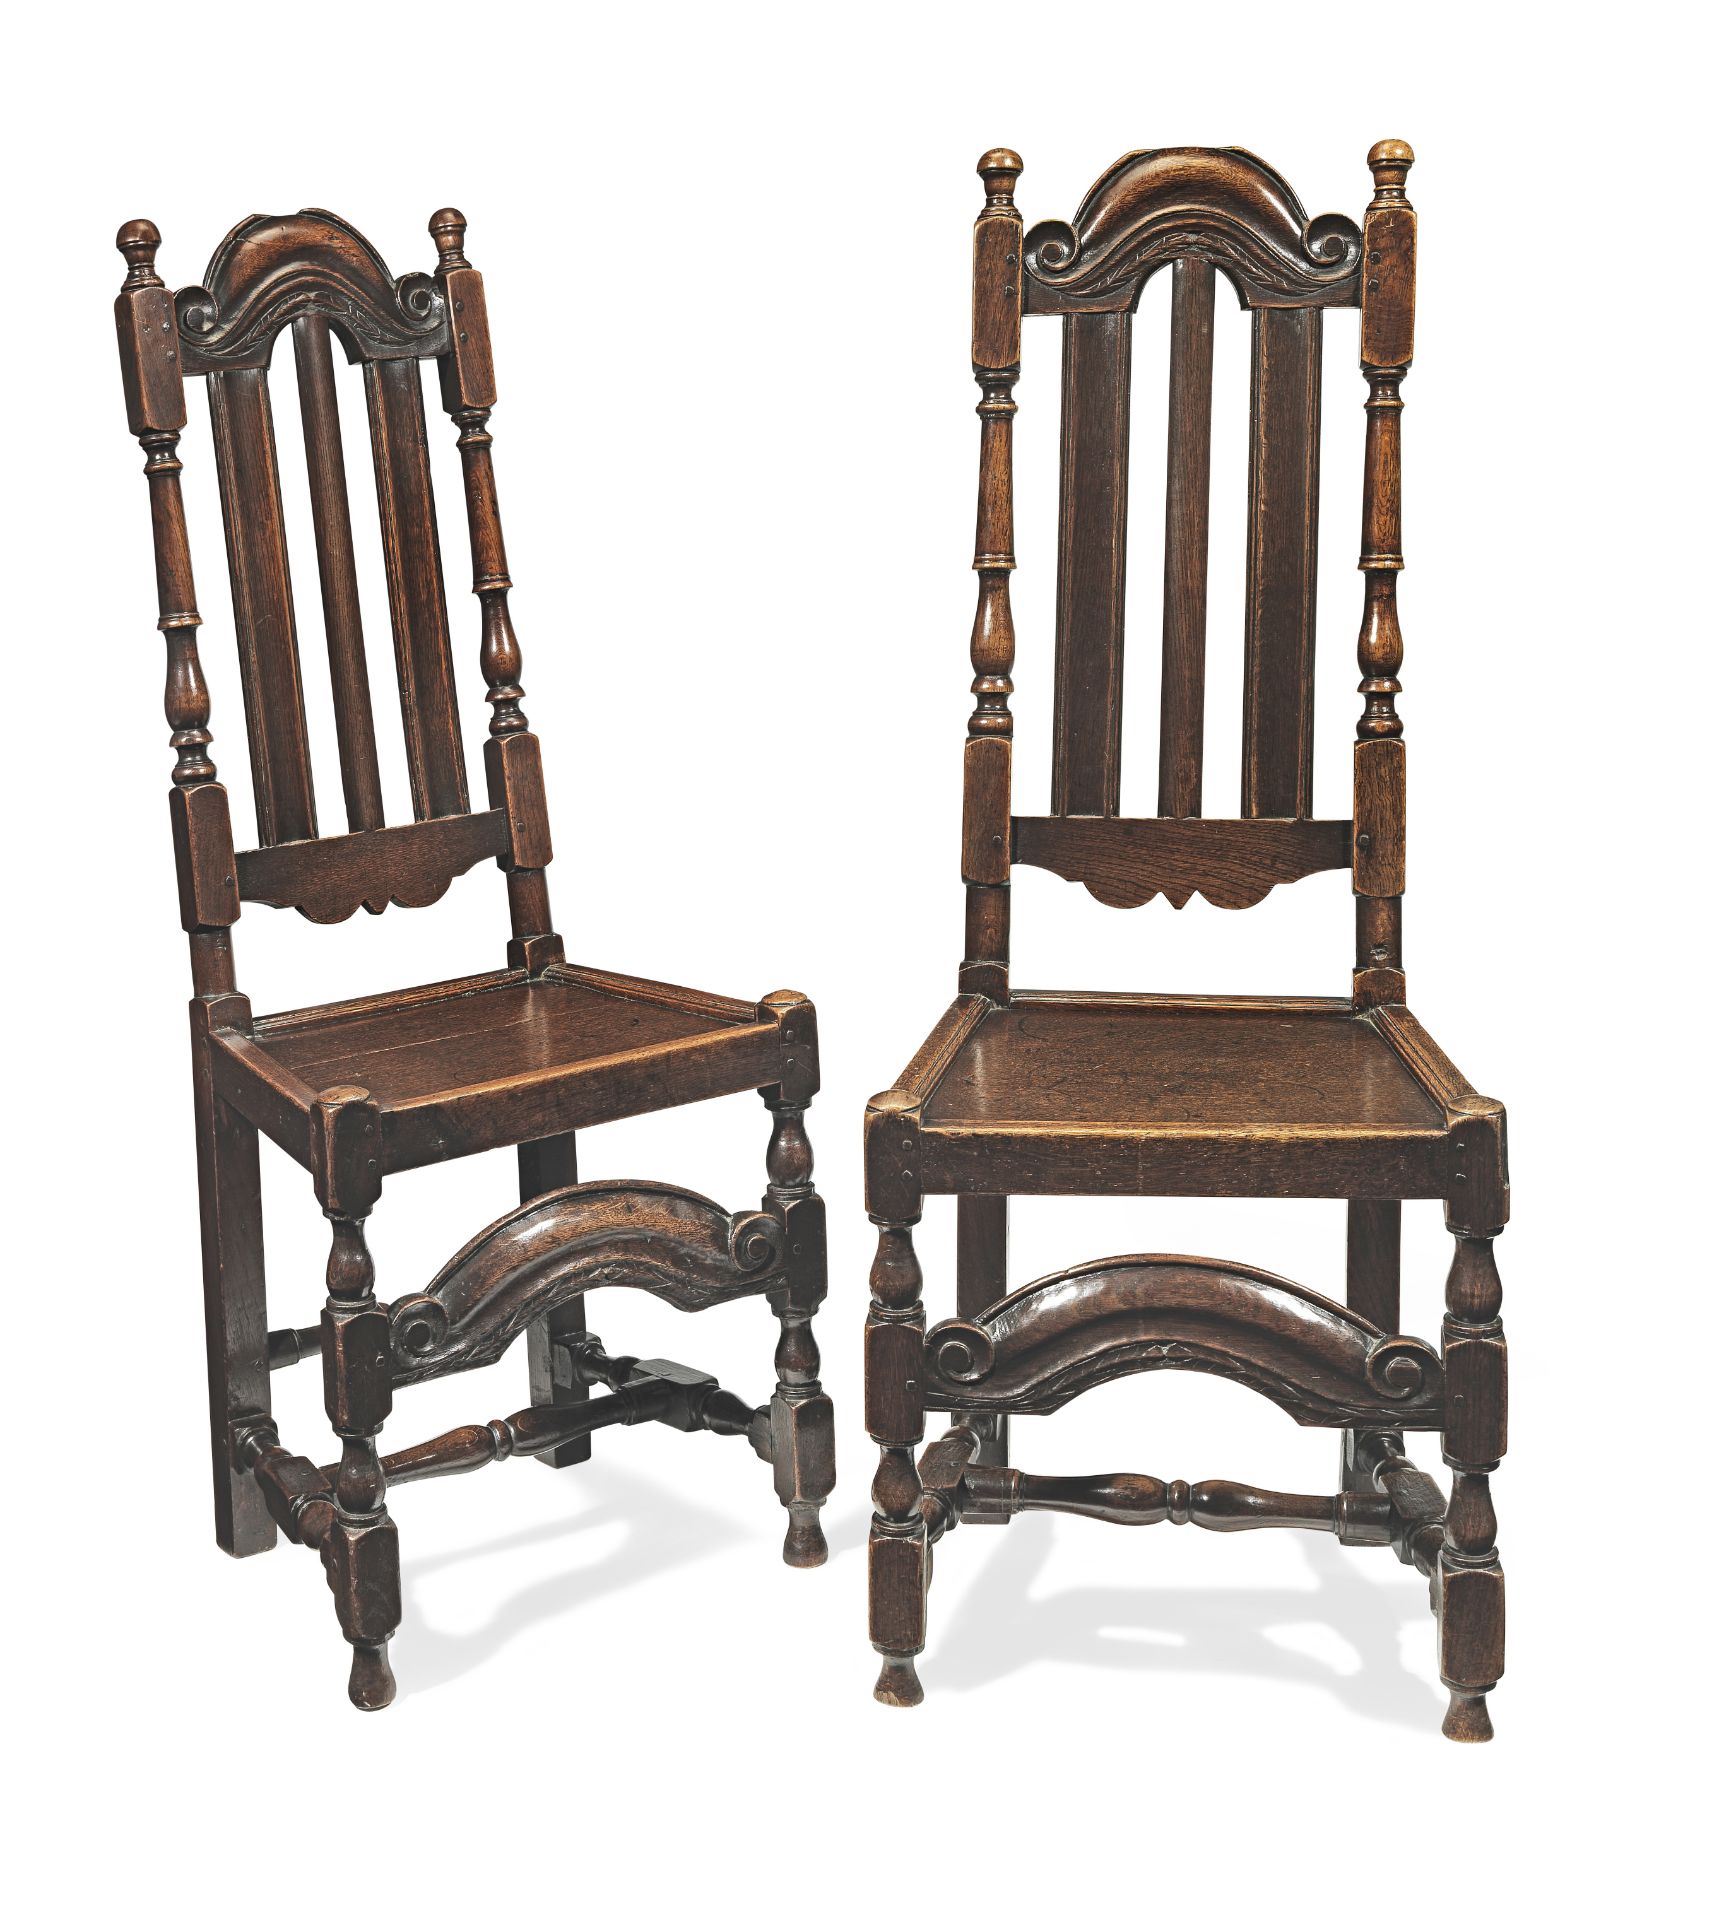 A pair of William & Mary oak slat-back chairs, circa 1690